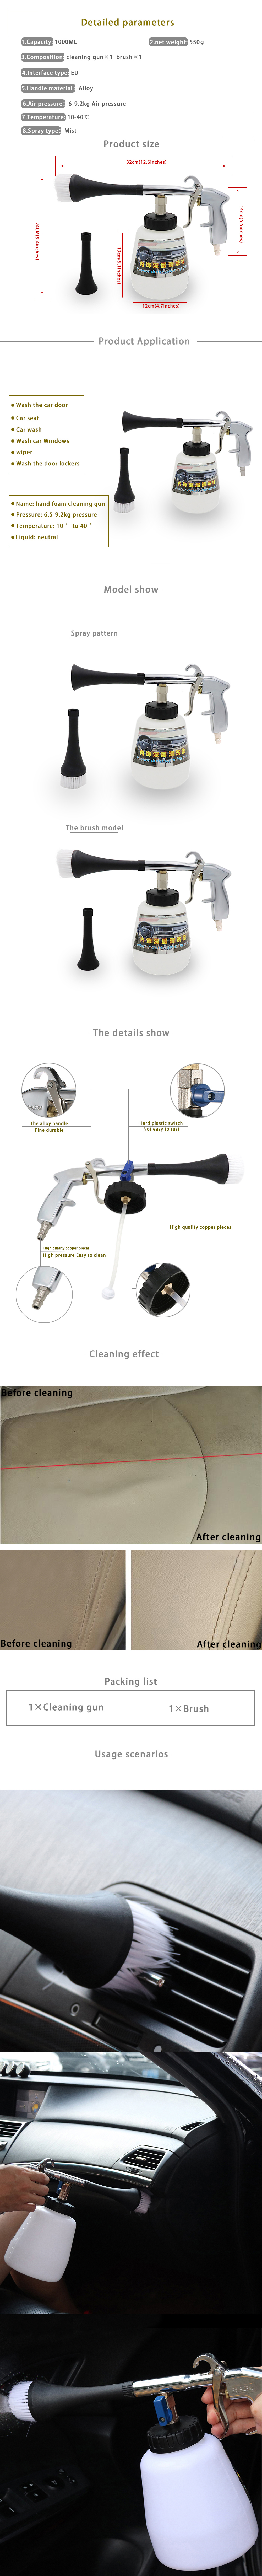 Car Cleaning Washing Foamaster Nozzle Sprayer Air Pulse Equipment